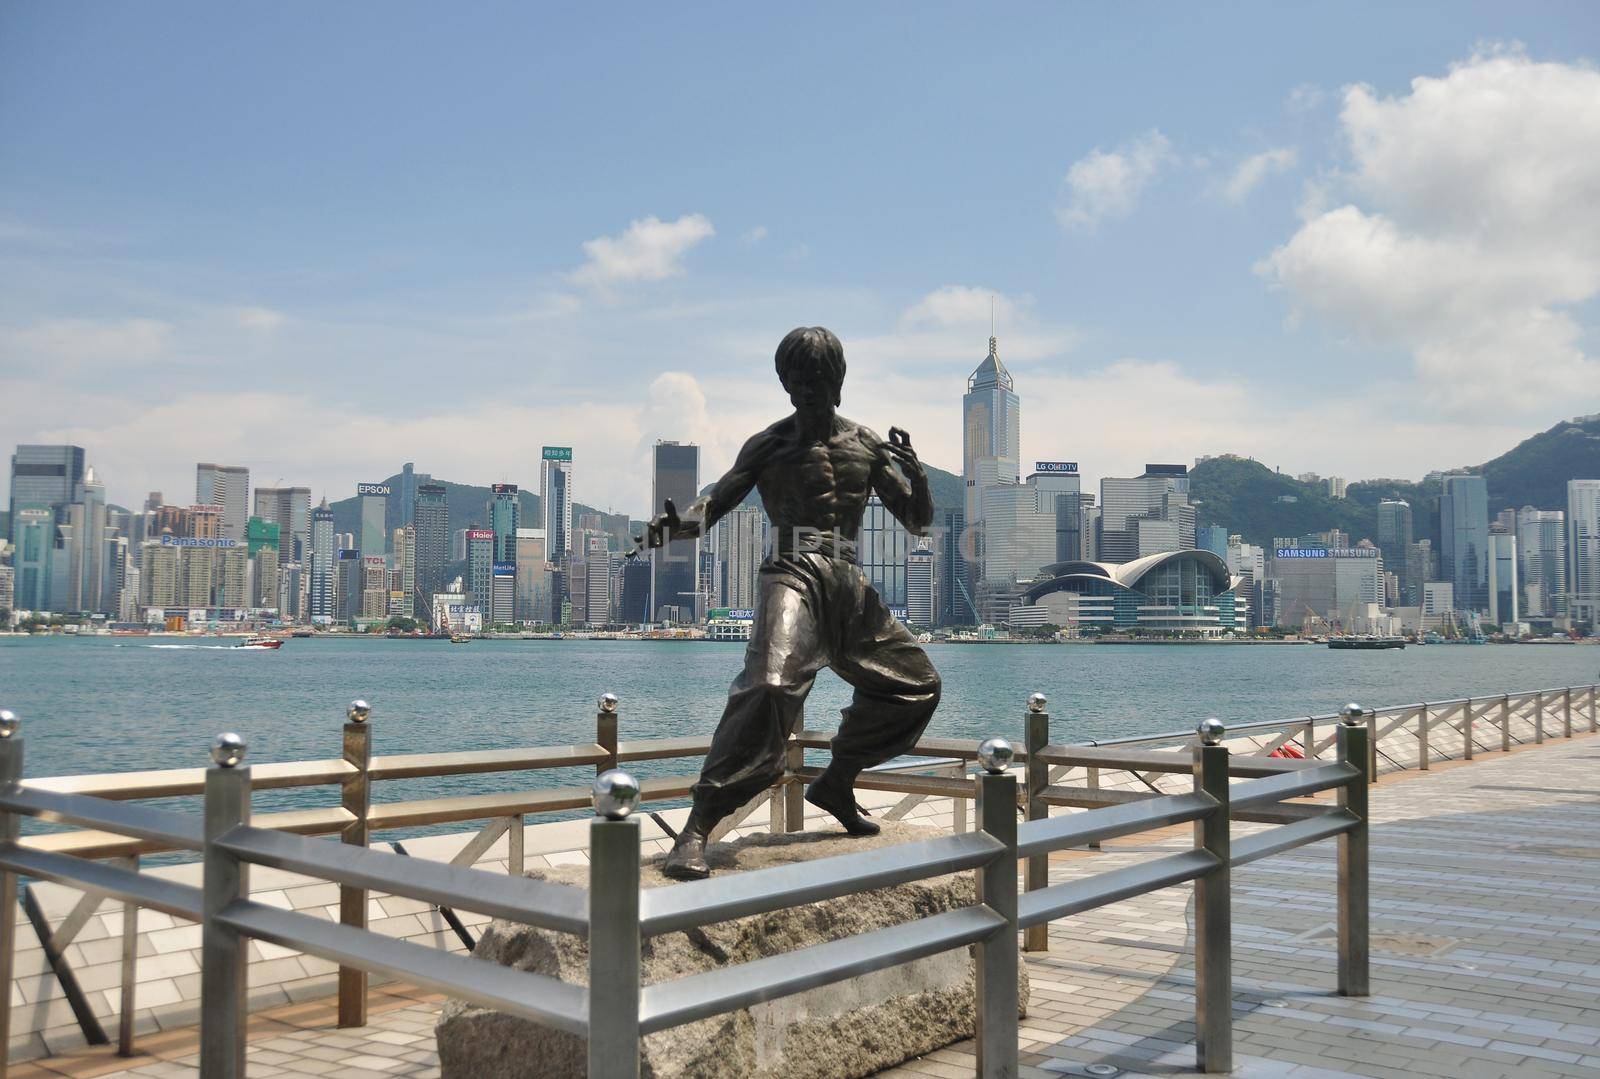 HONG KONG - 23th FEBRUARY, 2015 Metal fighter statue on pier of city coastline with highrise buildings on background, Hong Kong. Statue of Bruse Lee fighter on seashore of city.